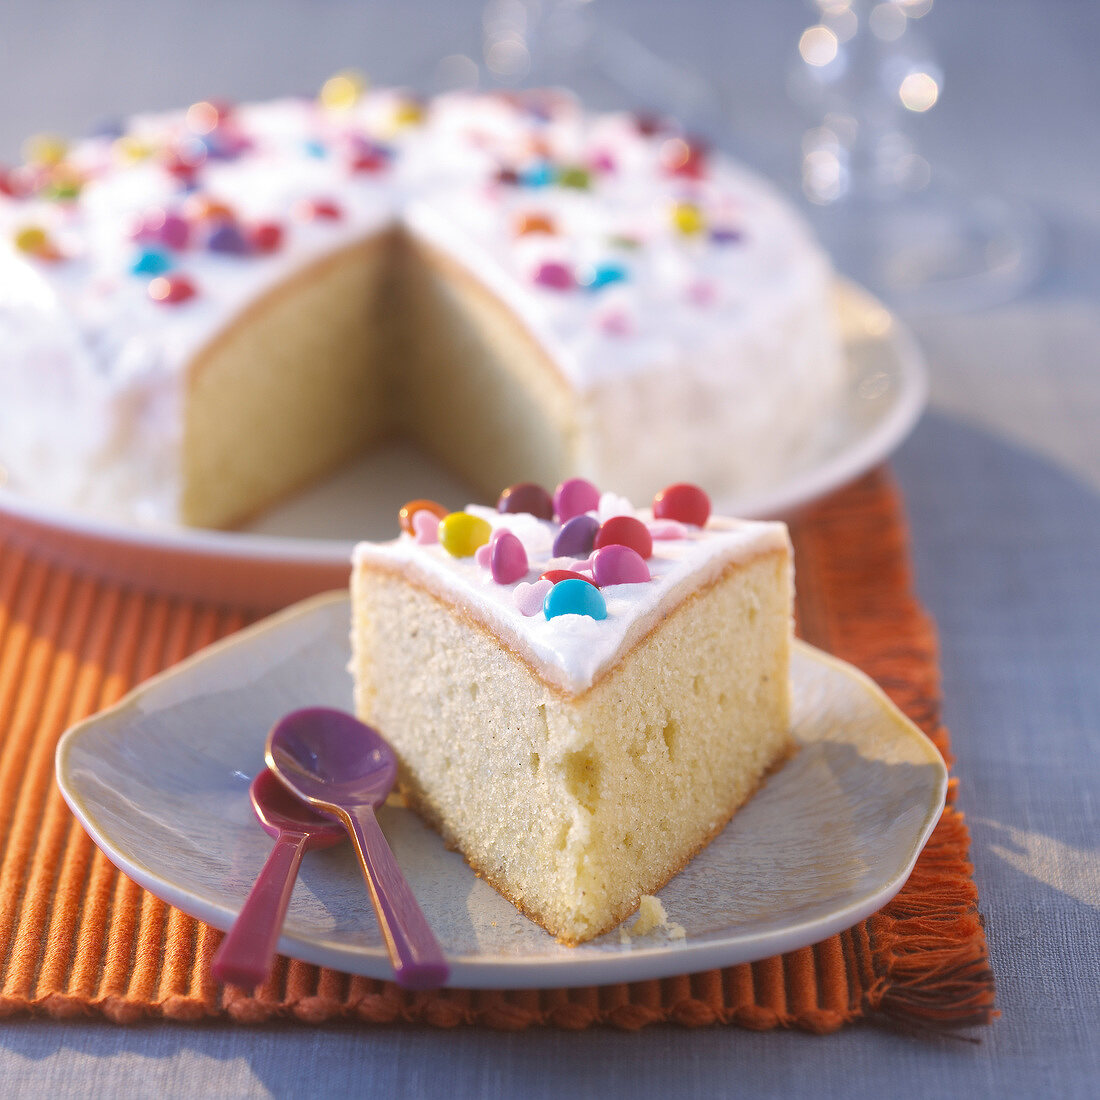 Vanilla pound cake with icing and Smarties